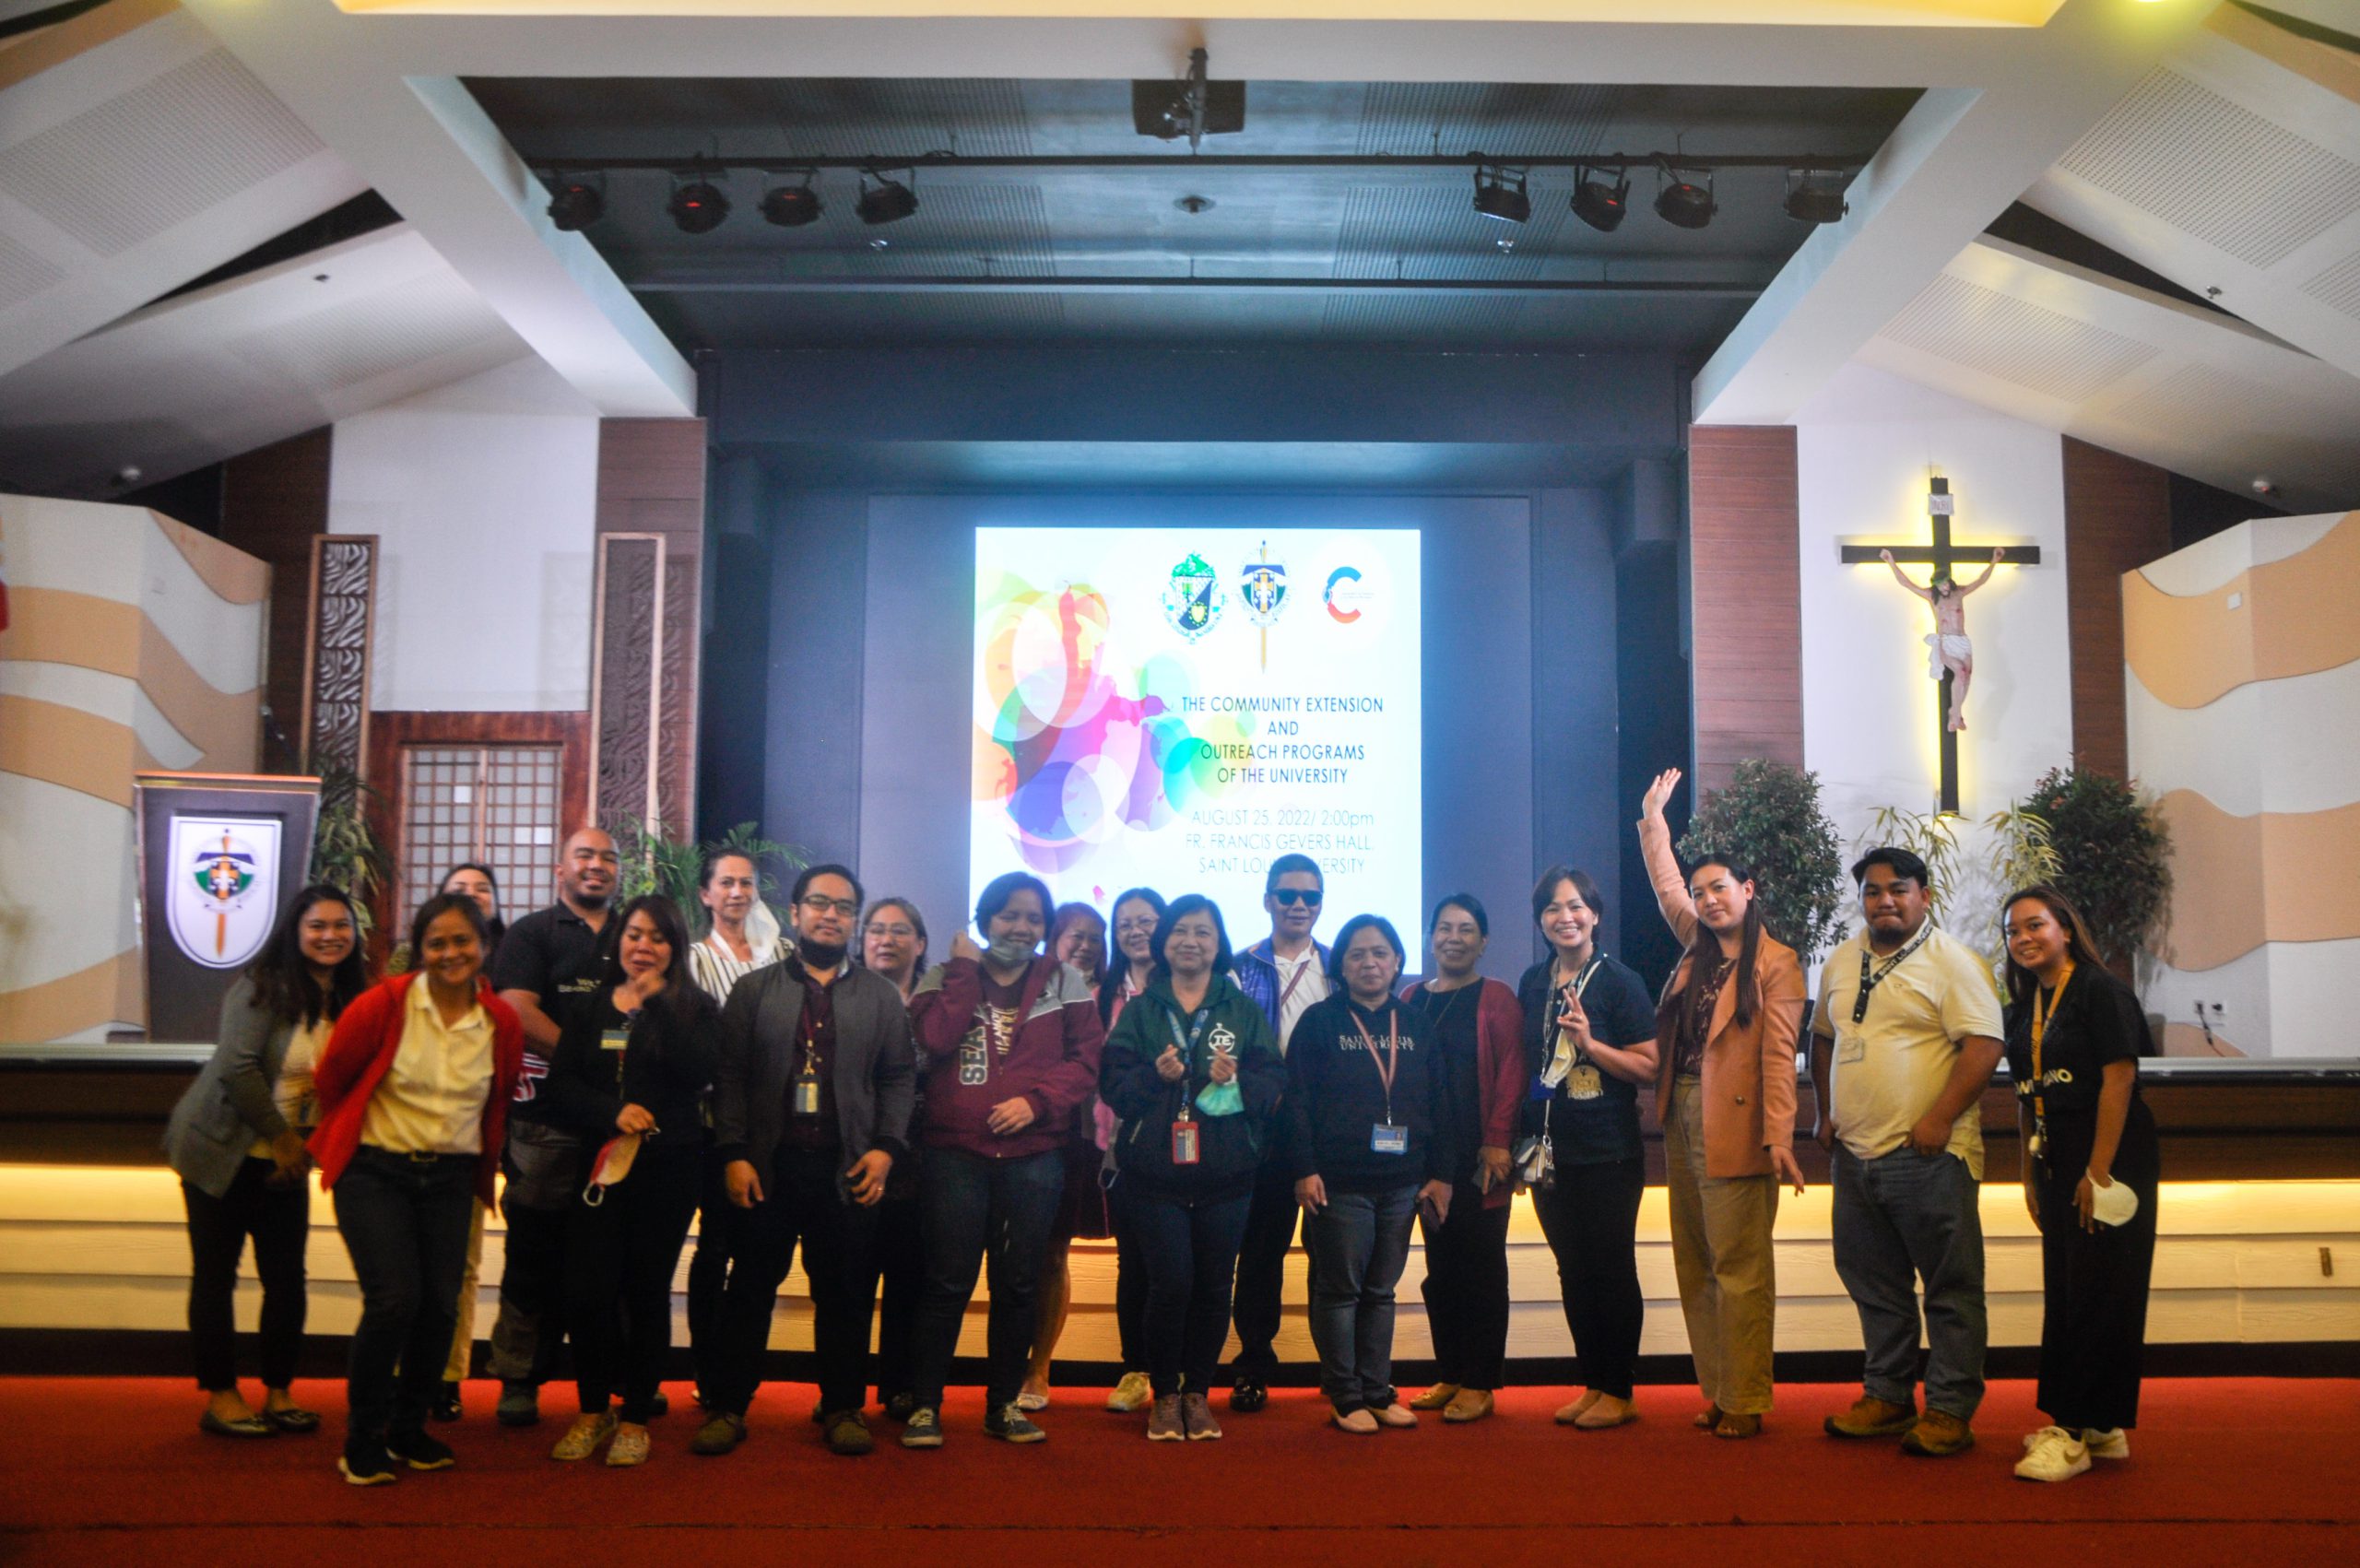 BINNADANG: SLU pursues “Bayanihan” mission with Extension and Outreach Programs and Social Services